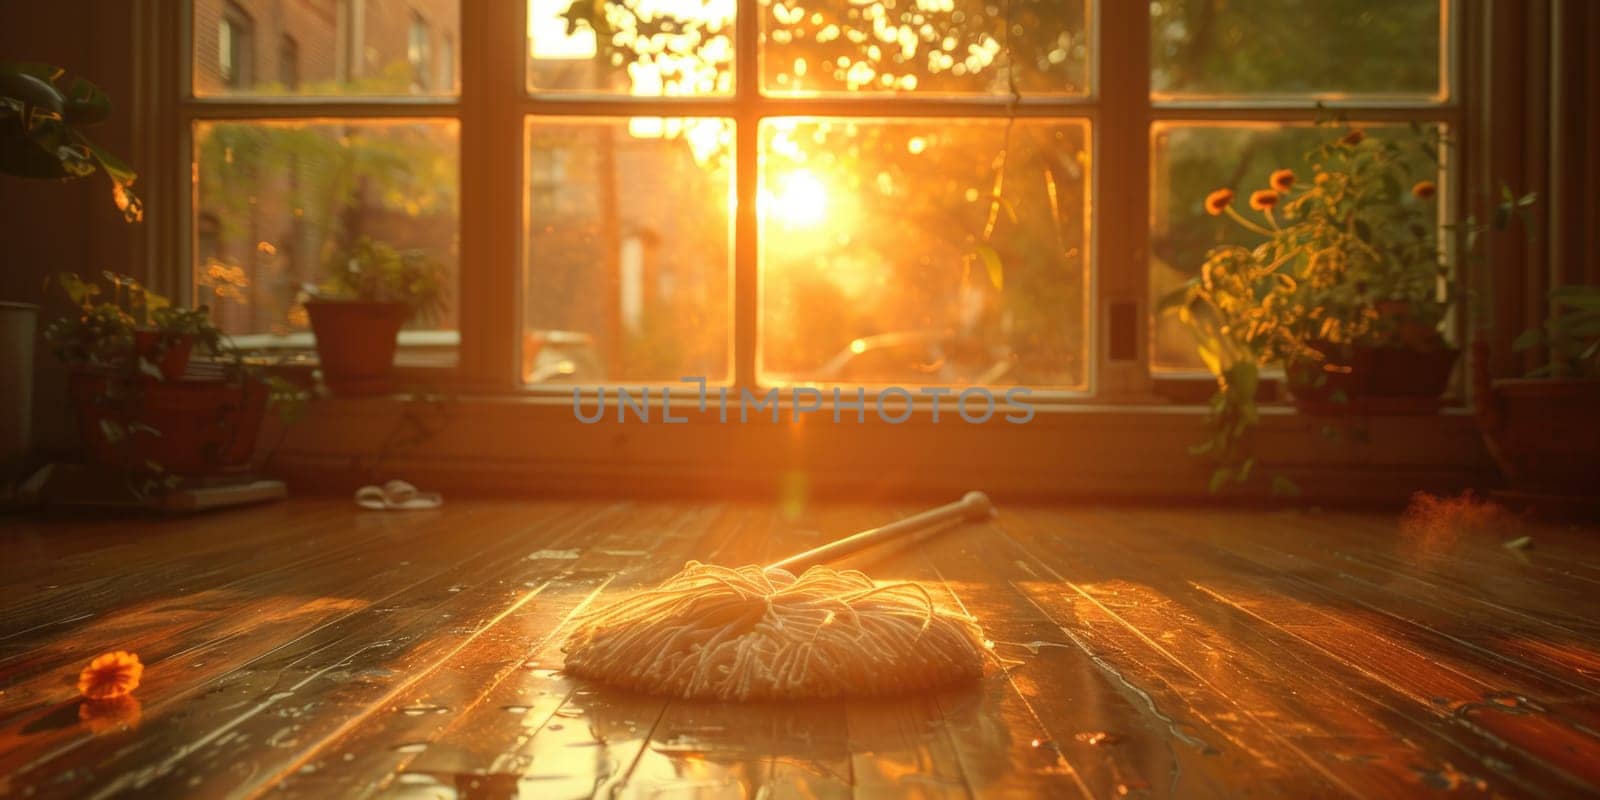 A room with a spacious window casting sunlight on a mop laying on the floor.